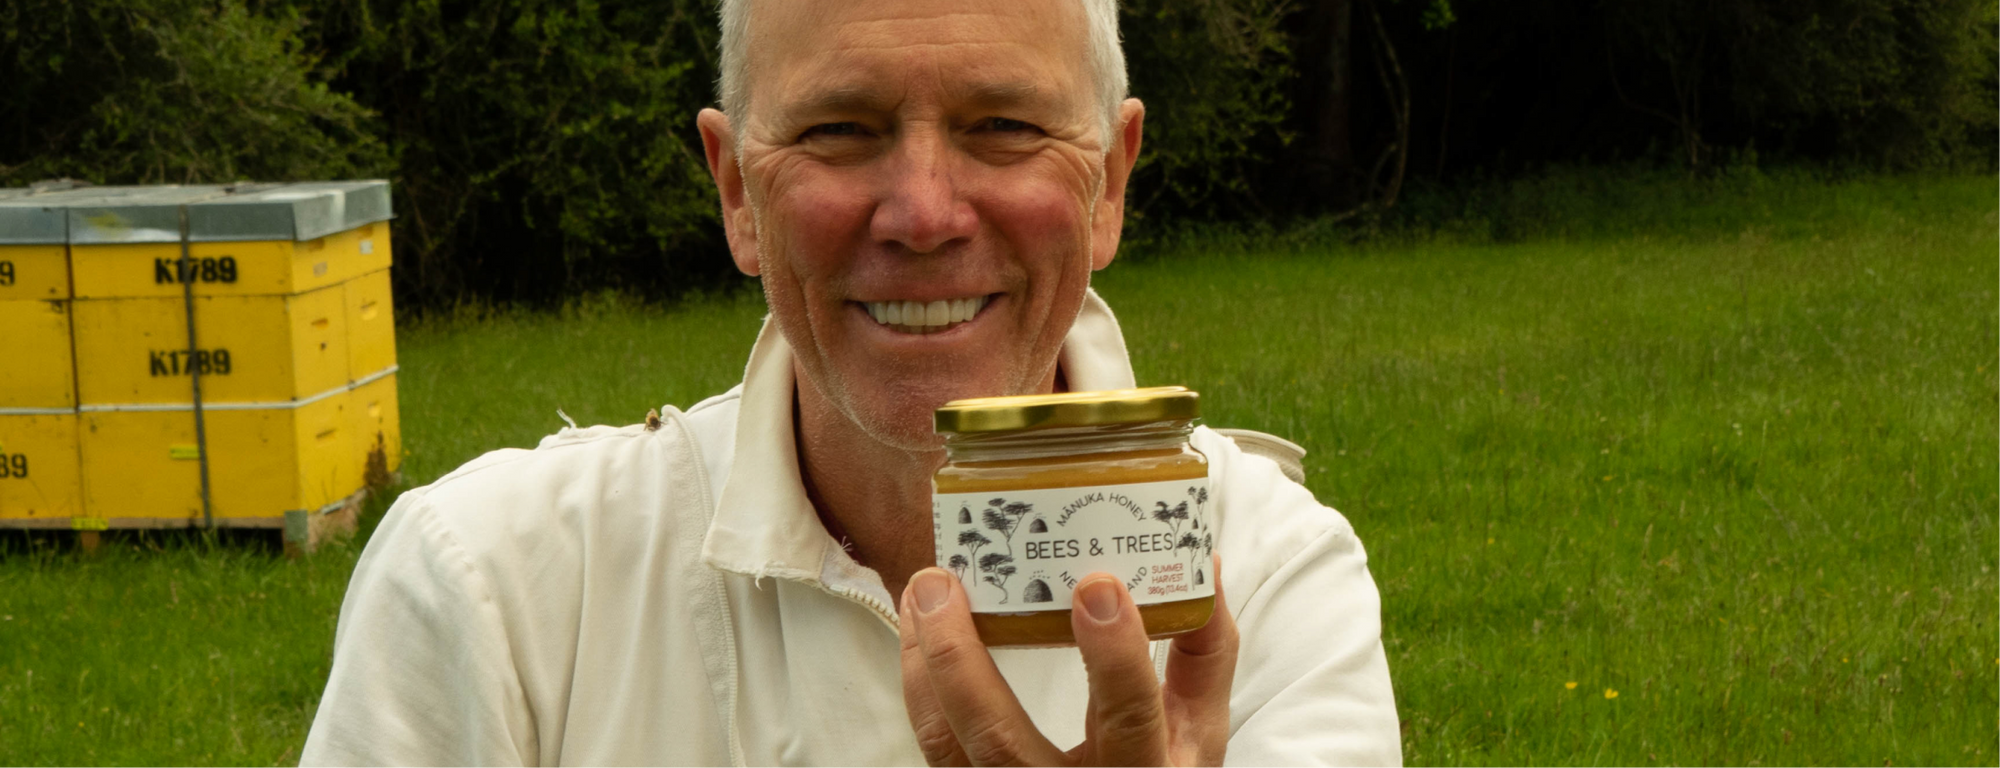 Behind the Hive: Exploring the Journey of Bees & Trees Founder Mike Everly